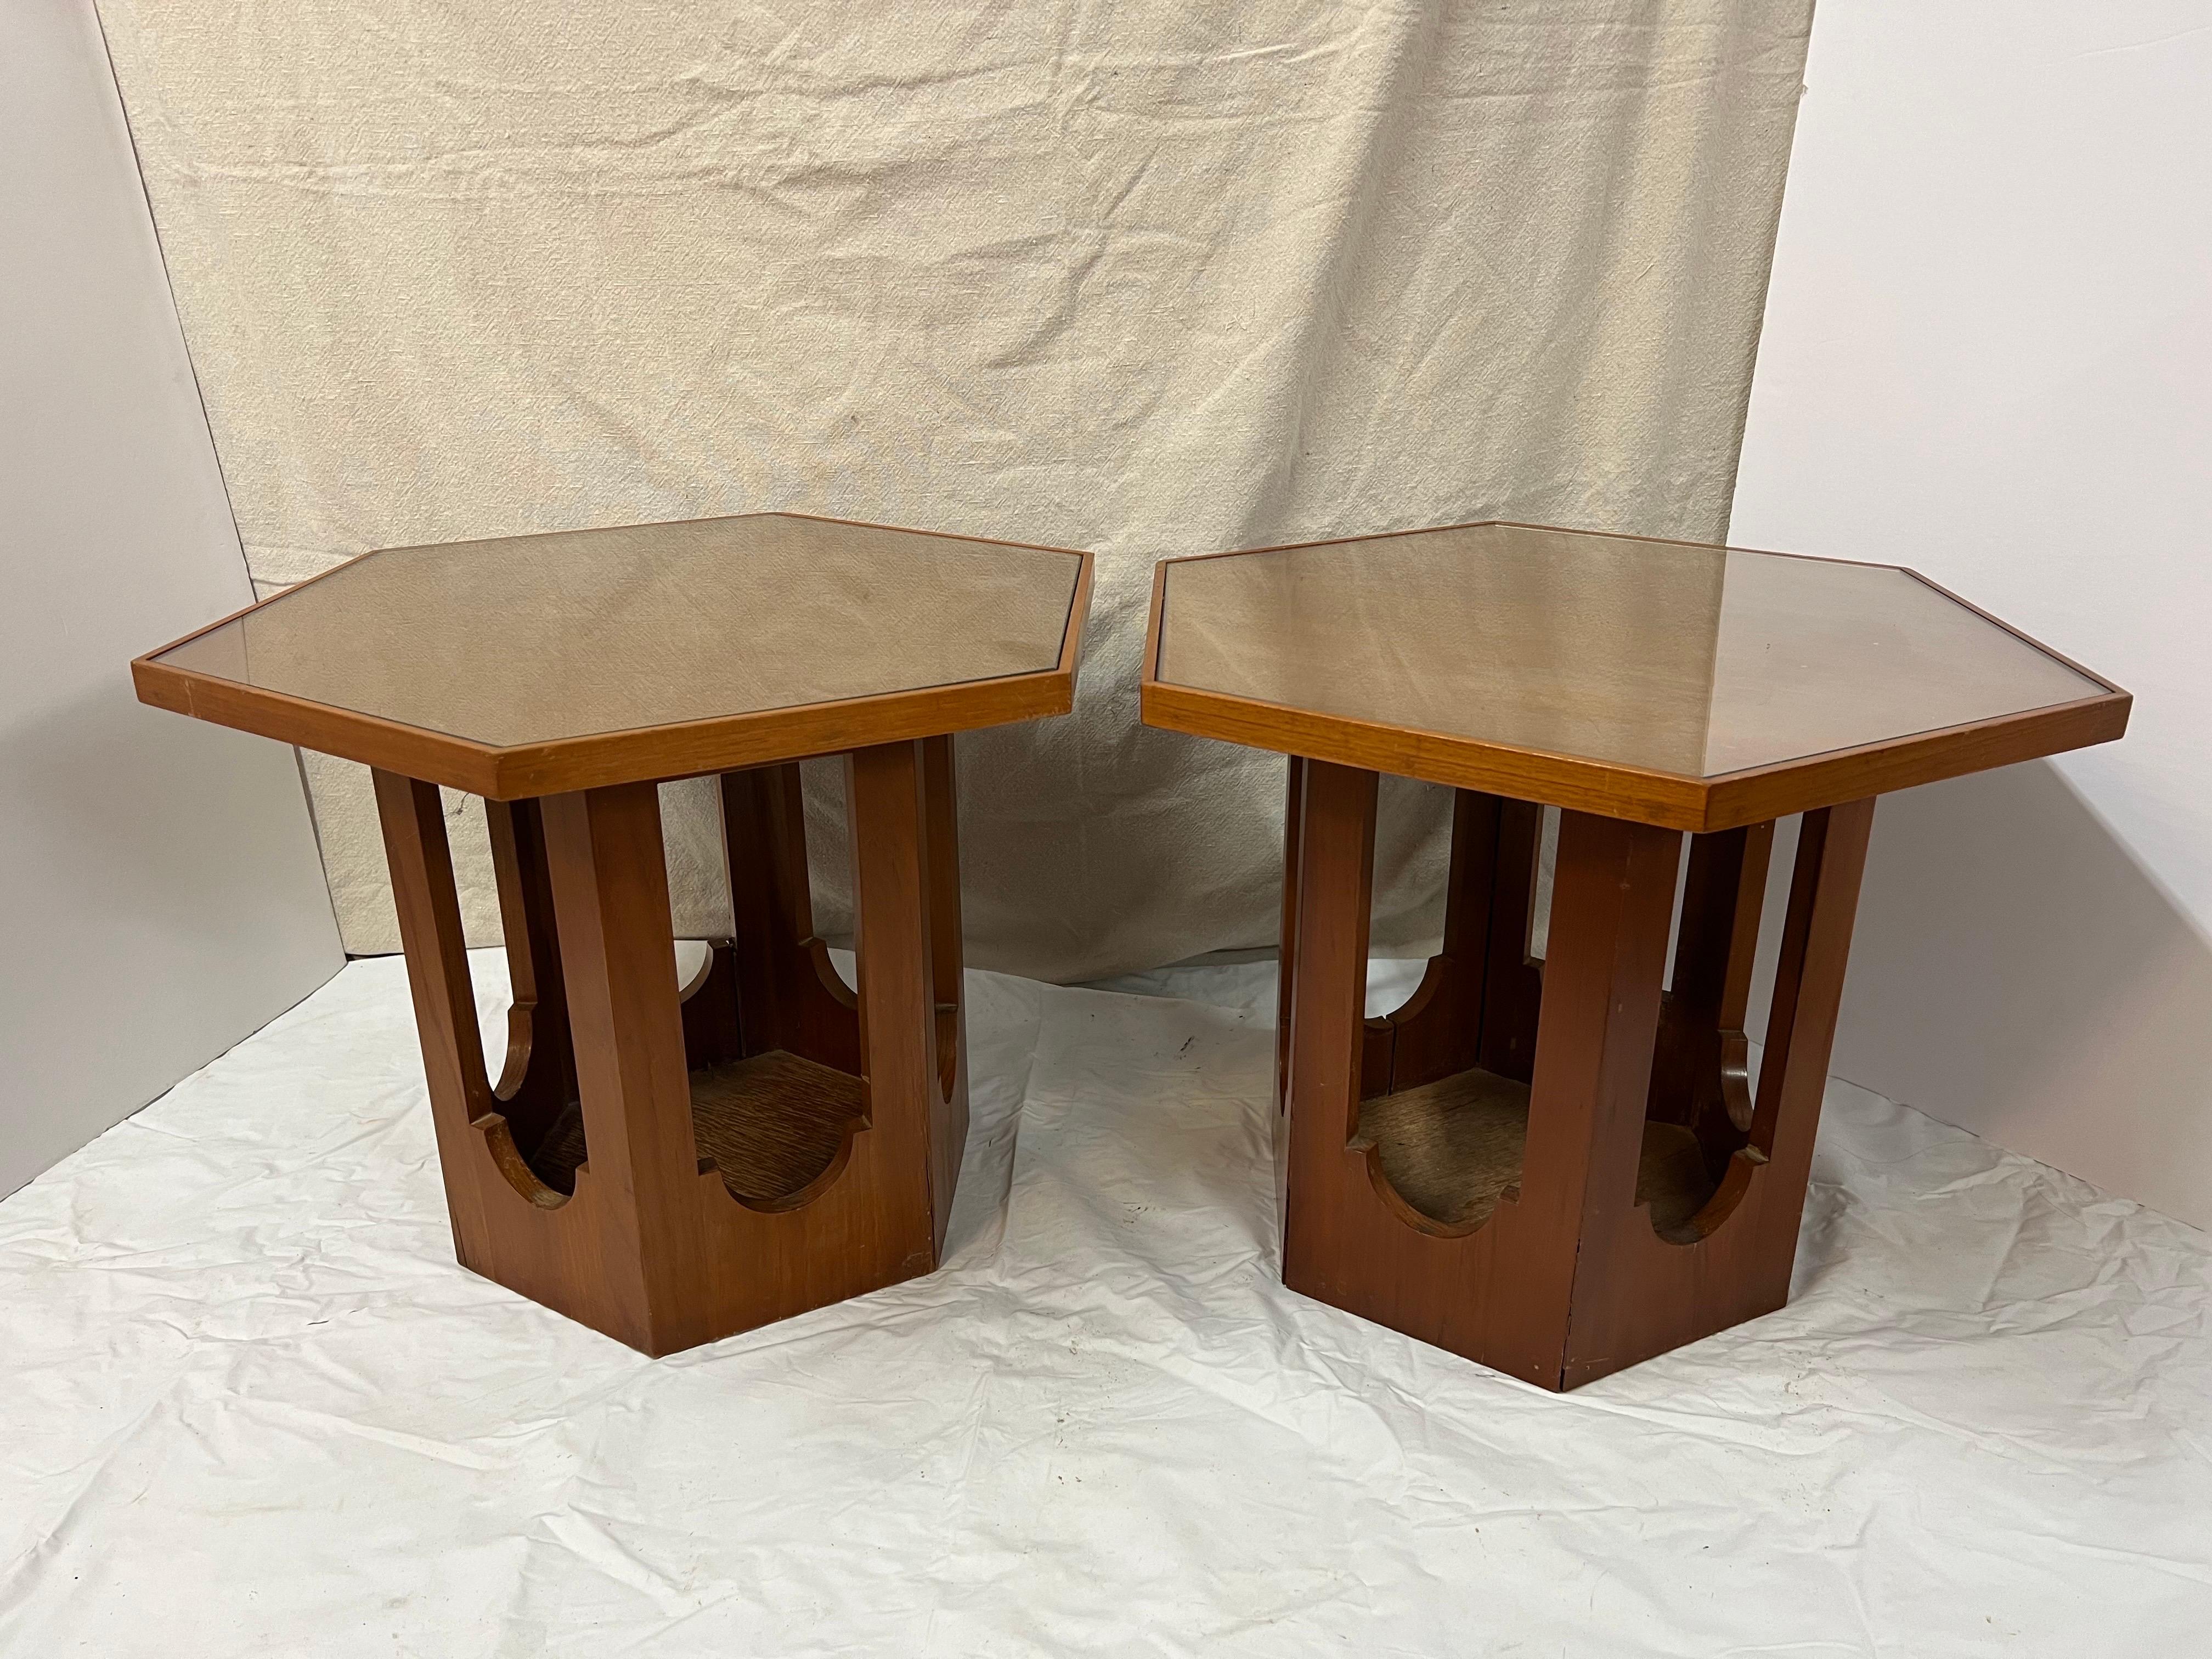 Pair of Mid Century tables by Harvey Probber. Hexagonal in shape with an inlaid glass . Made of Teak Wood. Some separation at some seams . See photos. These can parcel ship domestically much more economically than white glove.